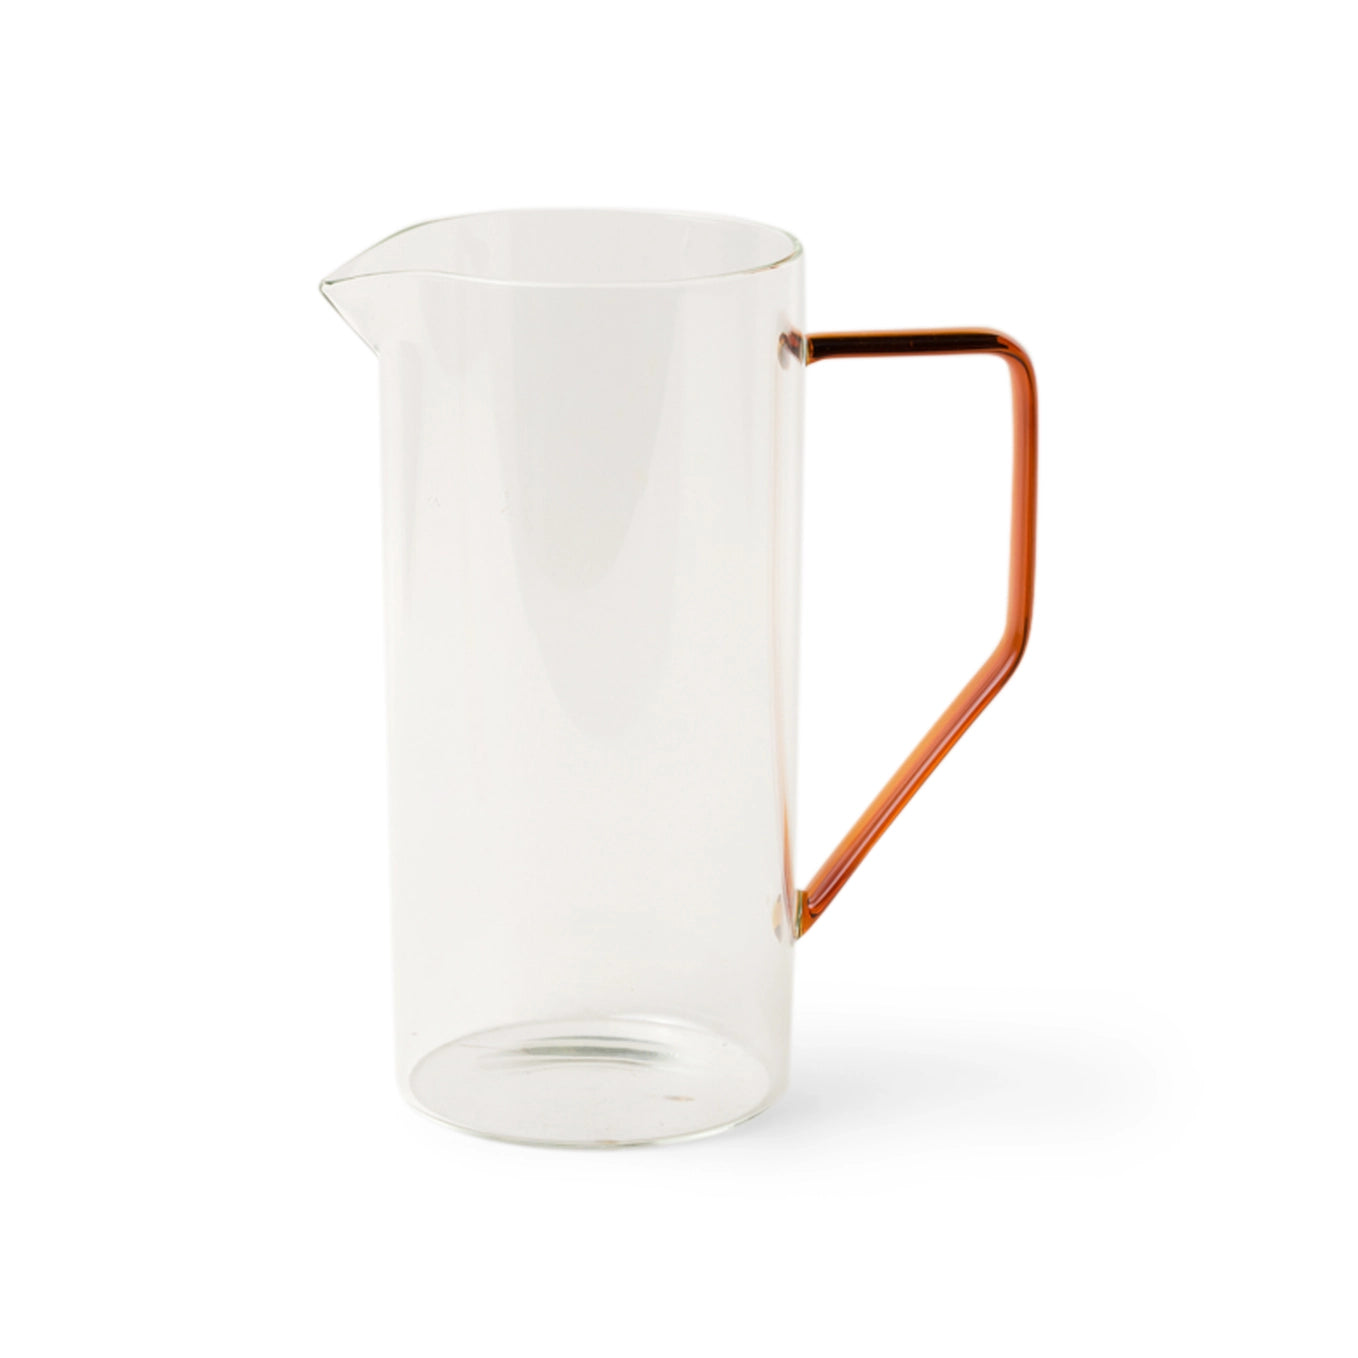 Glass Tea Pitcher - Clear with Amber Handle, 2L